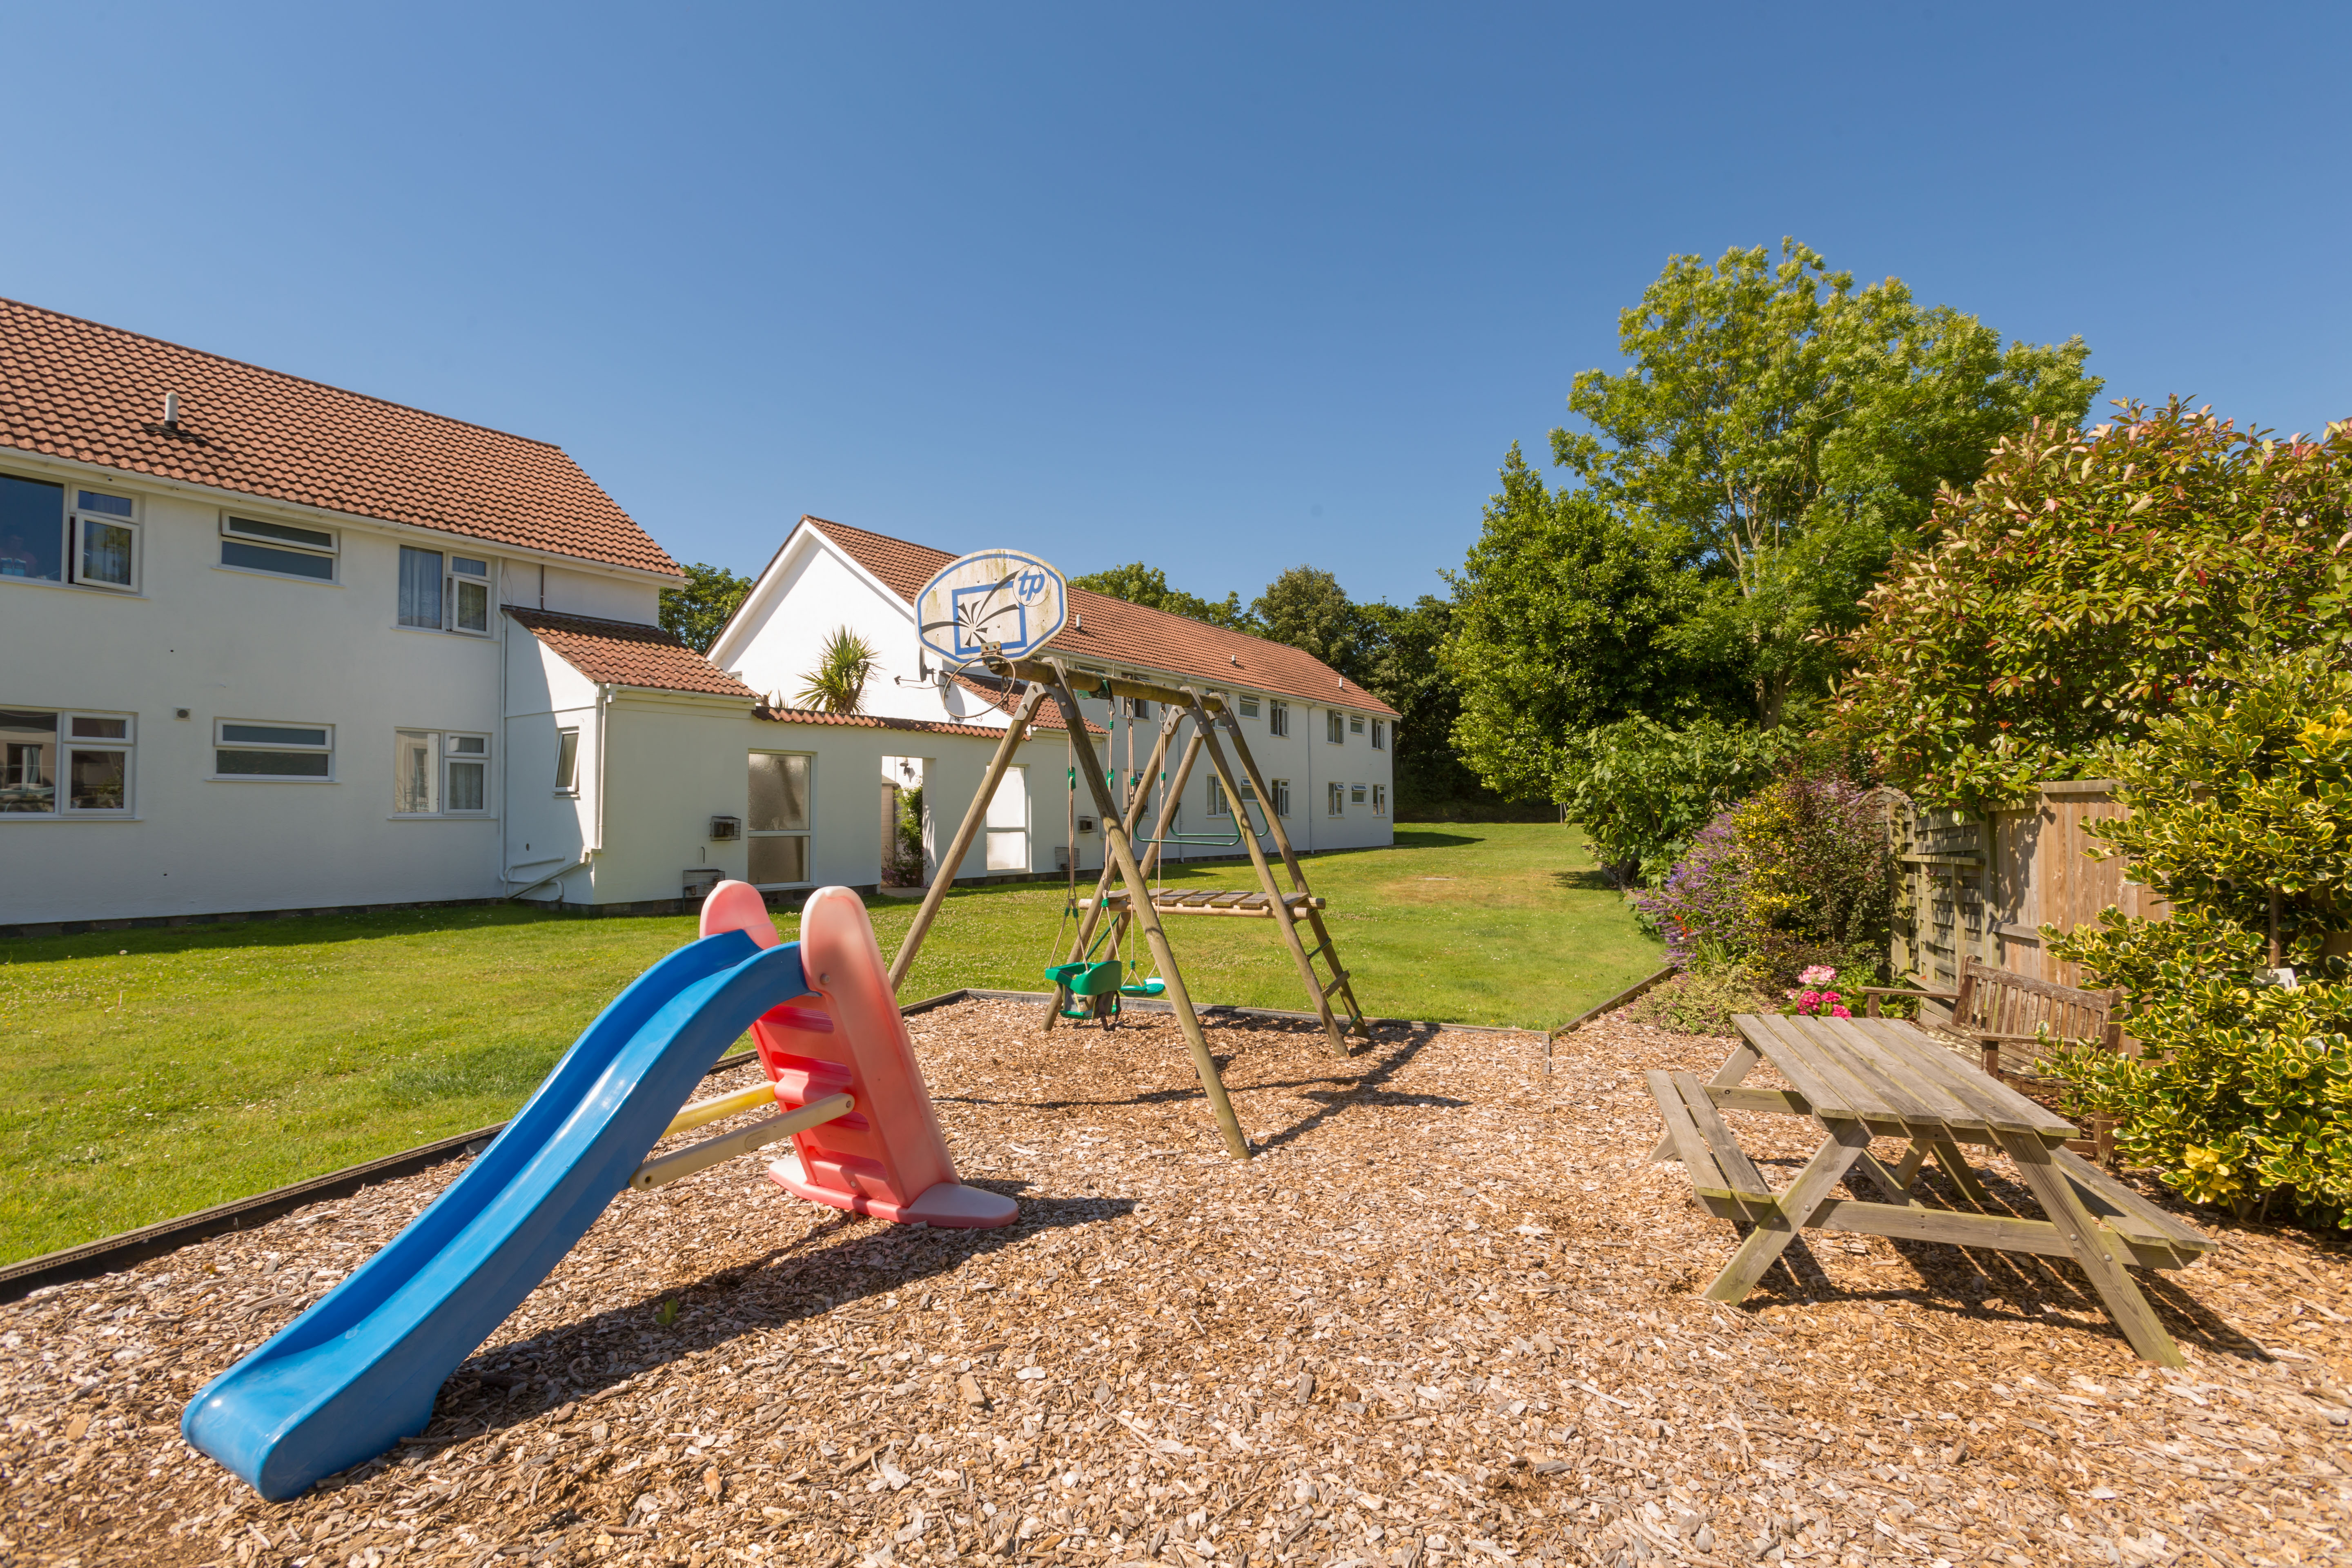 Childrens play area and lawn